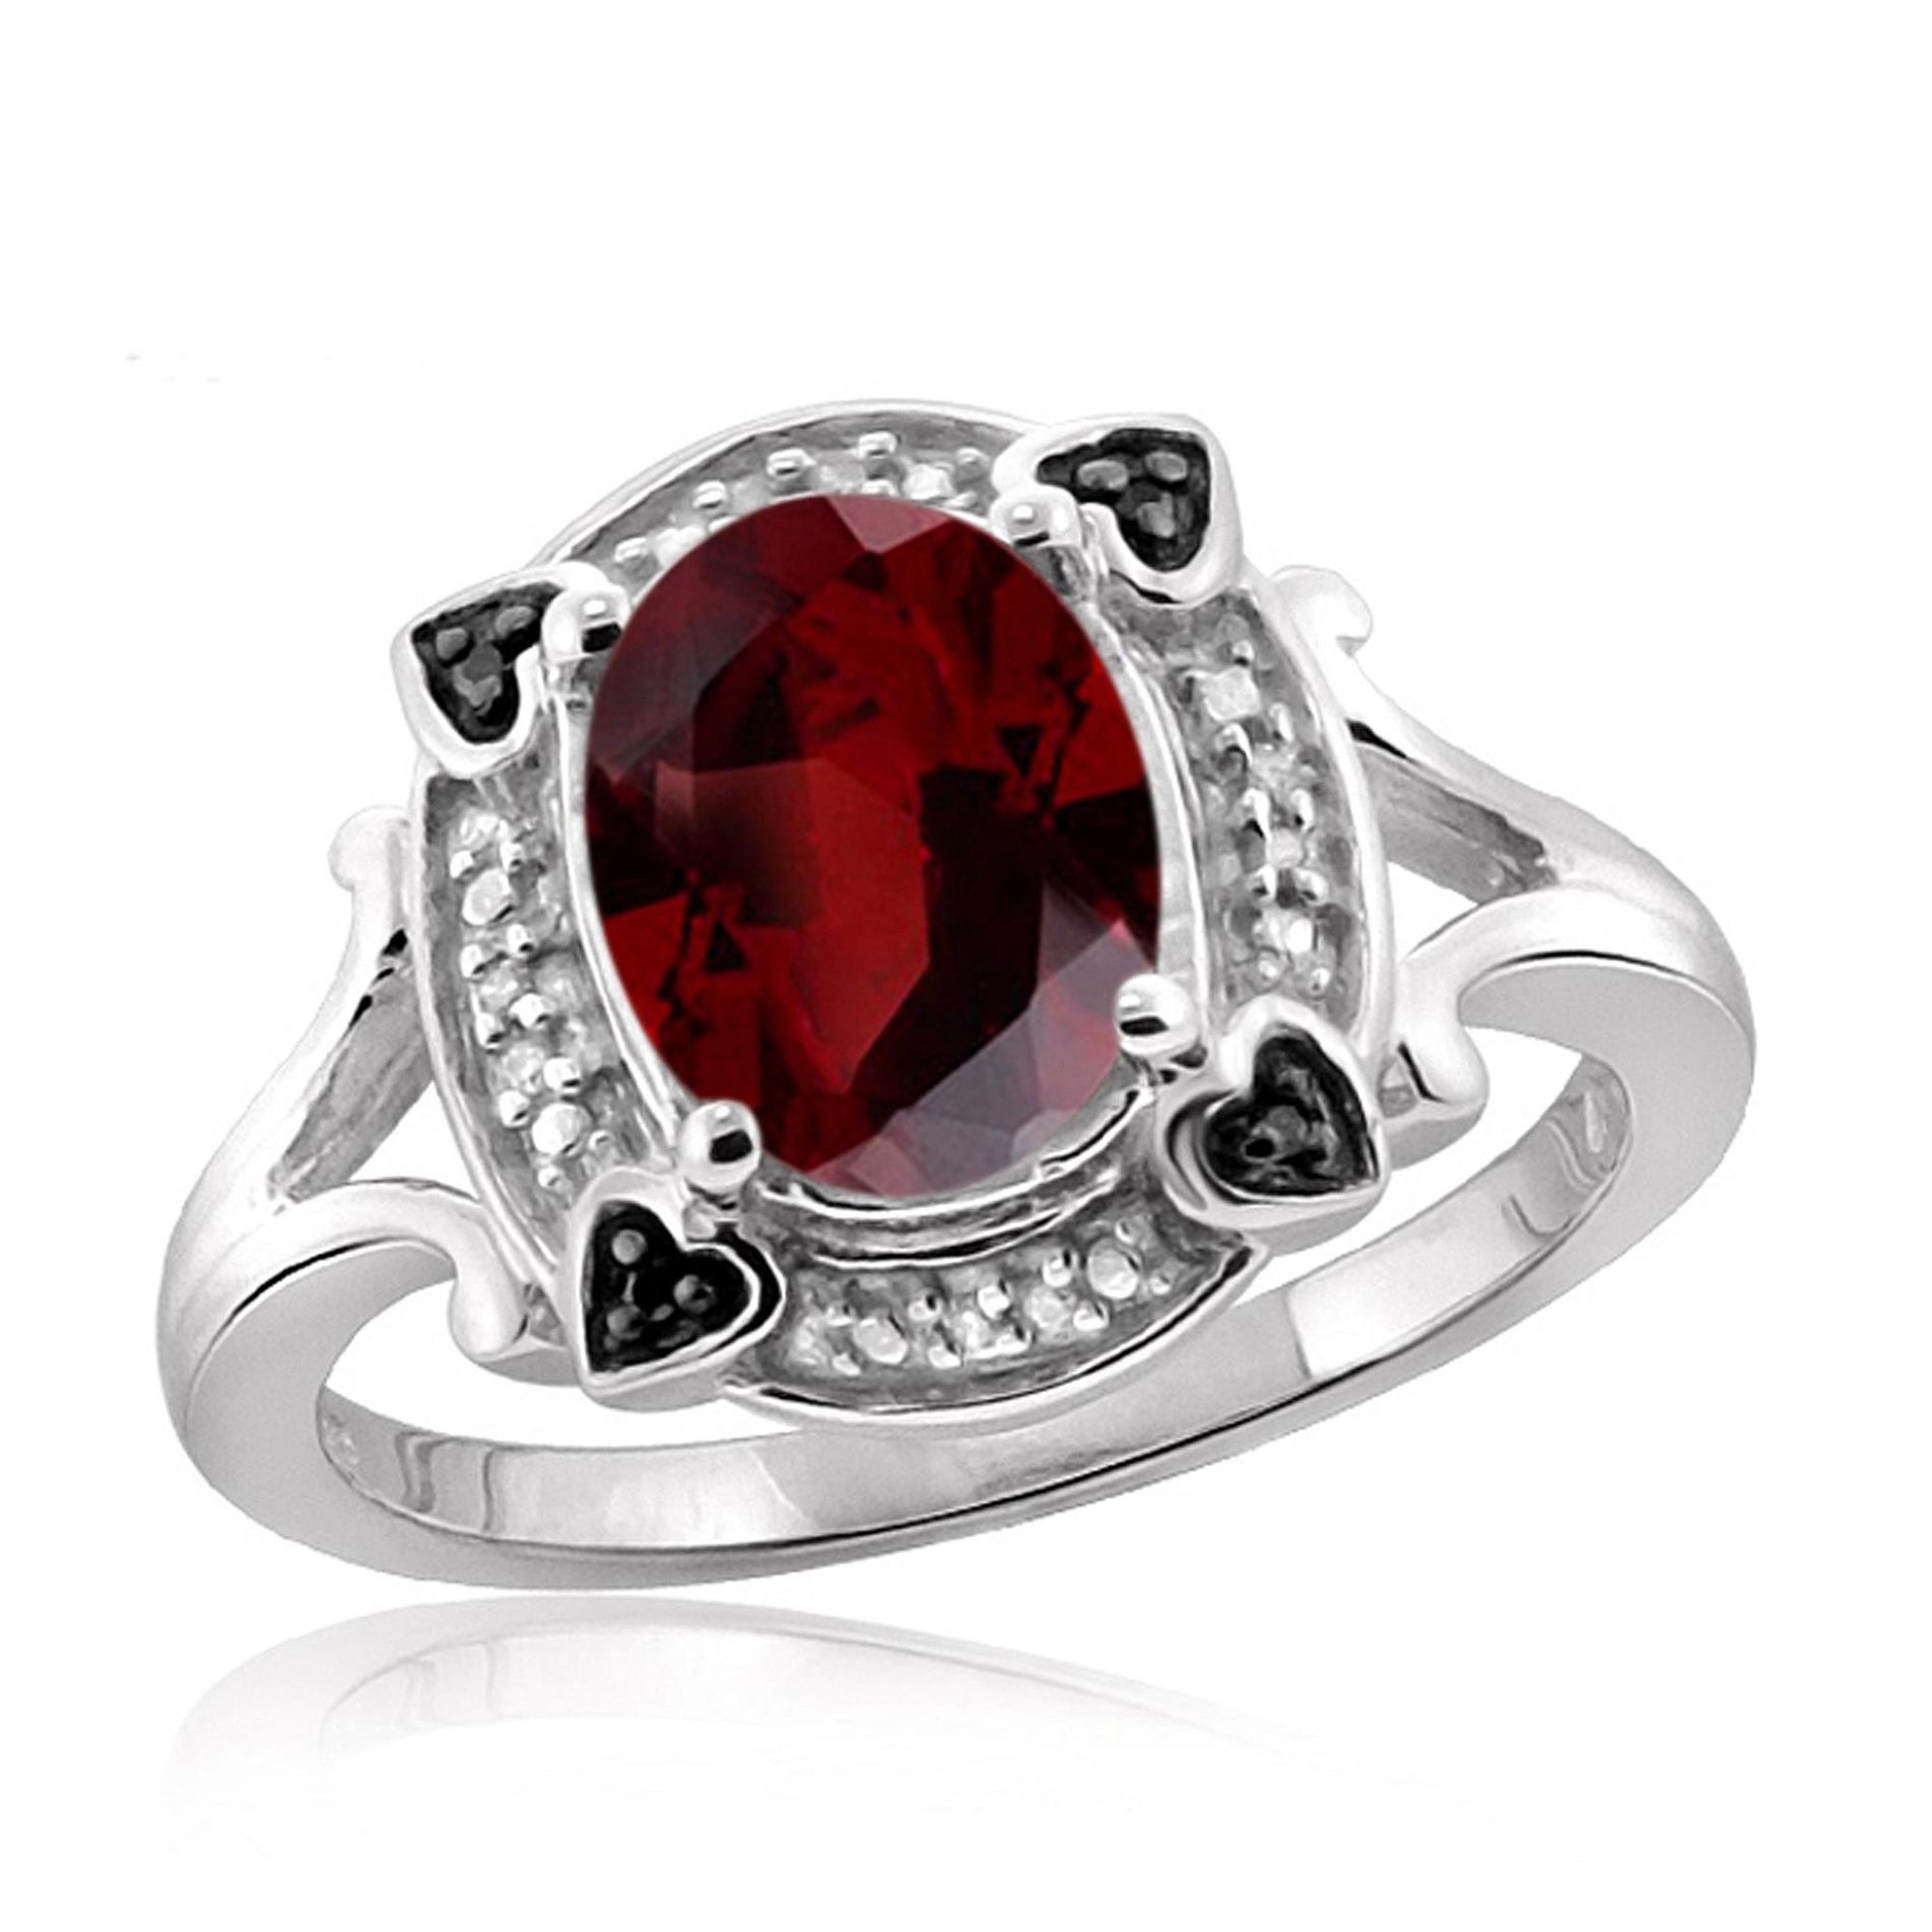 JewelonFire 2.15 Carat T.G.W. Garnet And 1/20 Carat T.W. Black & White Diamond Sterling Silver Ring - Assorted Colors